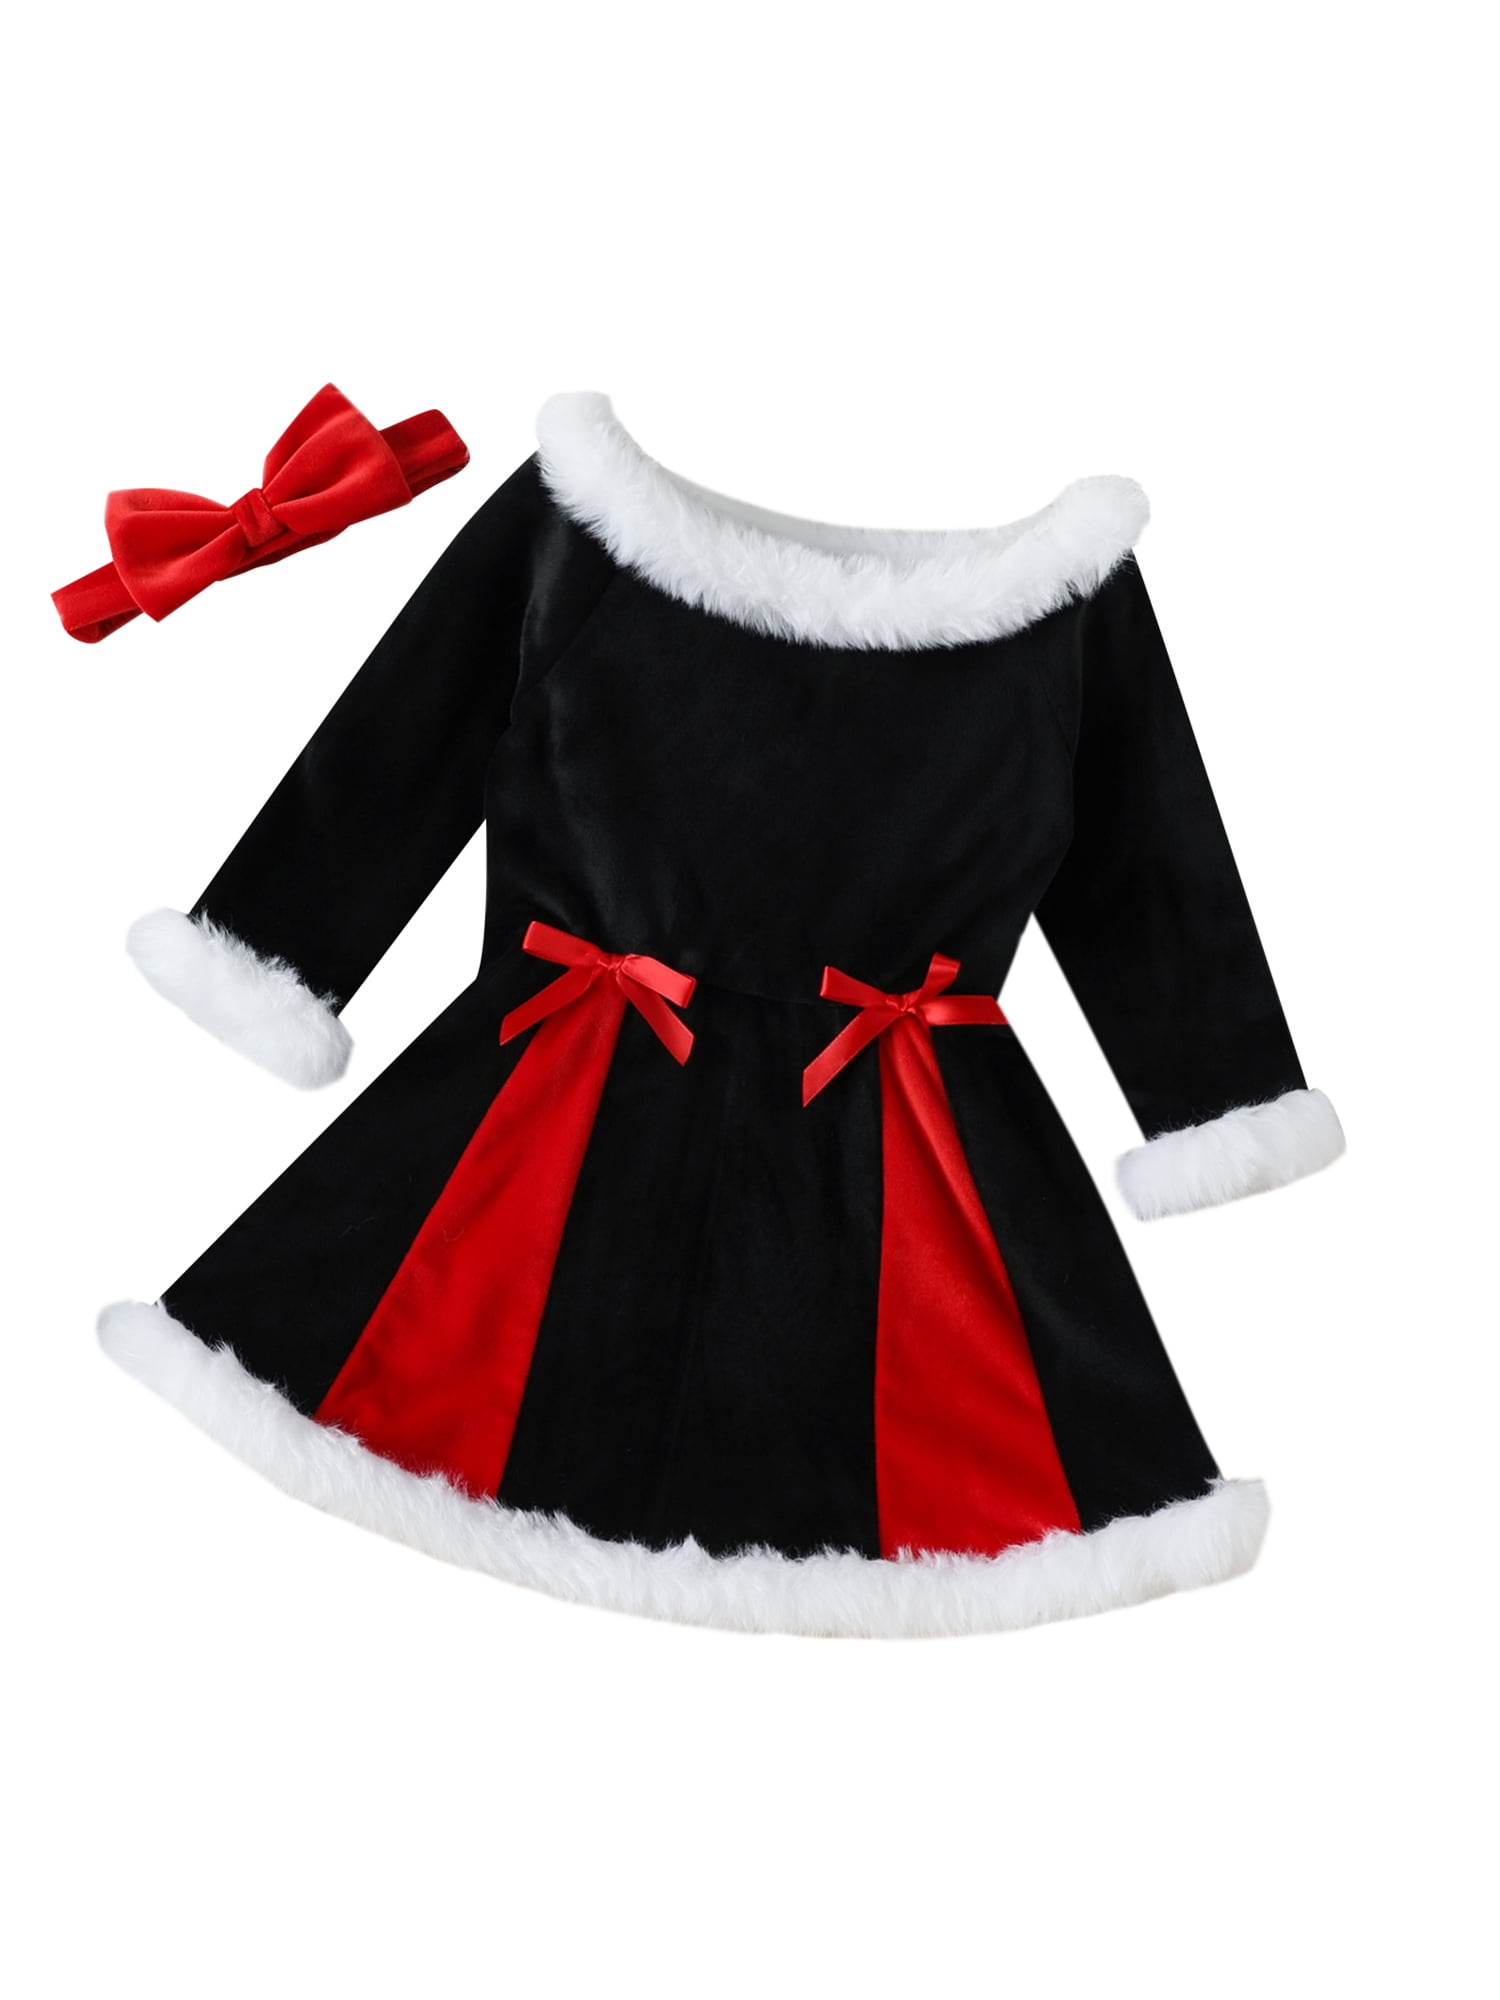 cuteheads Girl's Red Velvet and Tulle Christmas Holiday Dress 3T